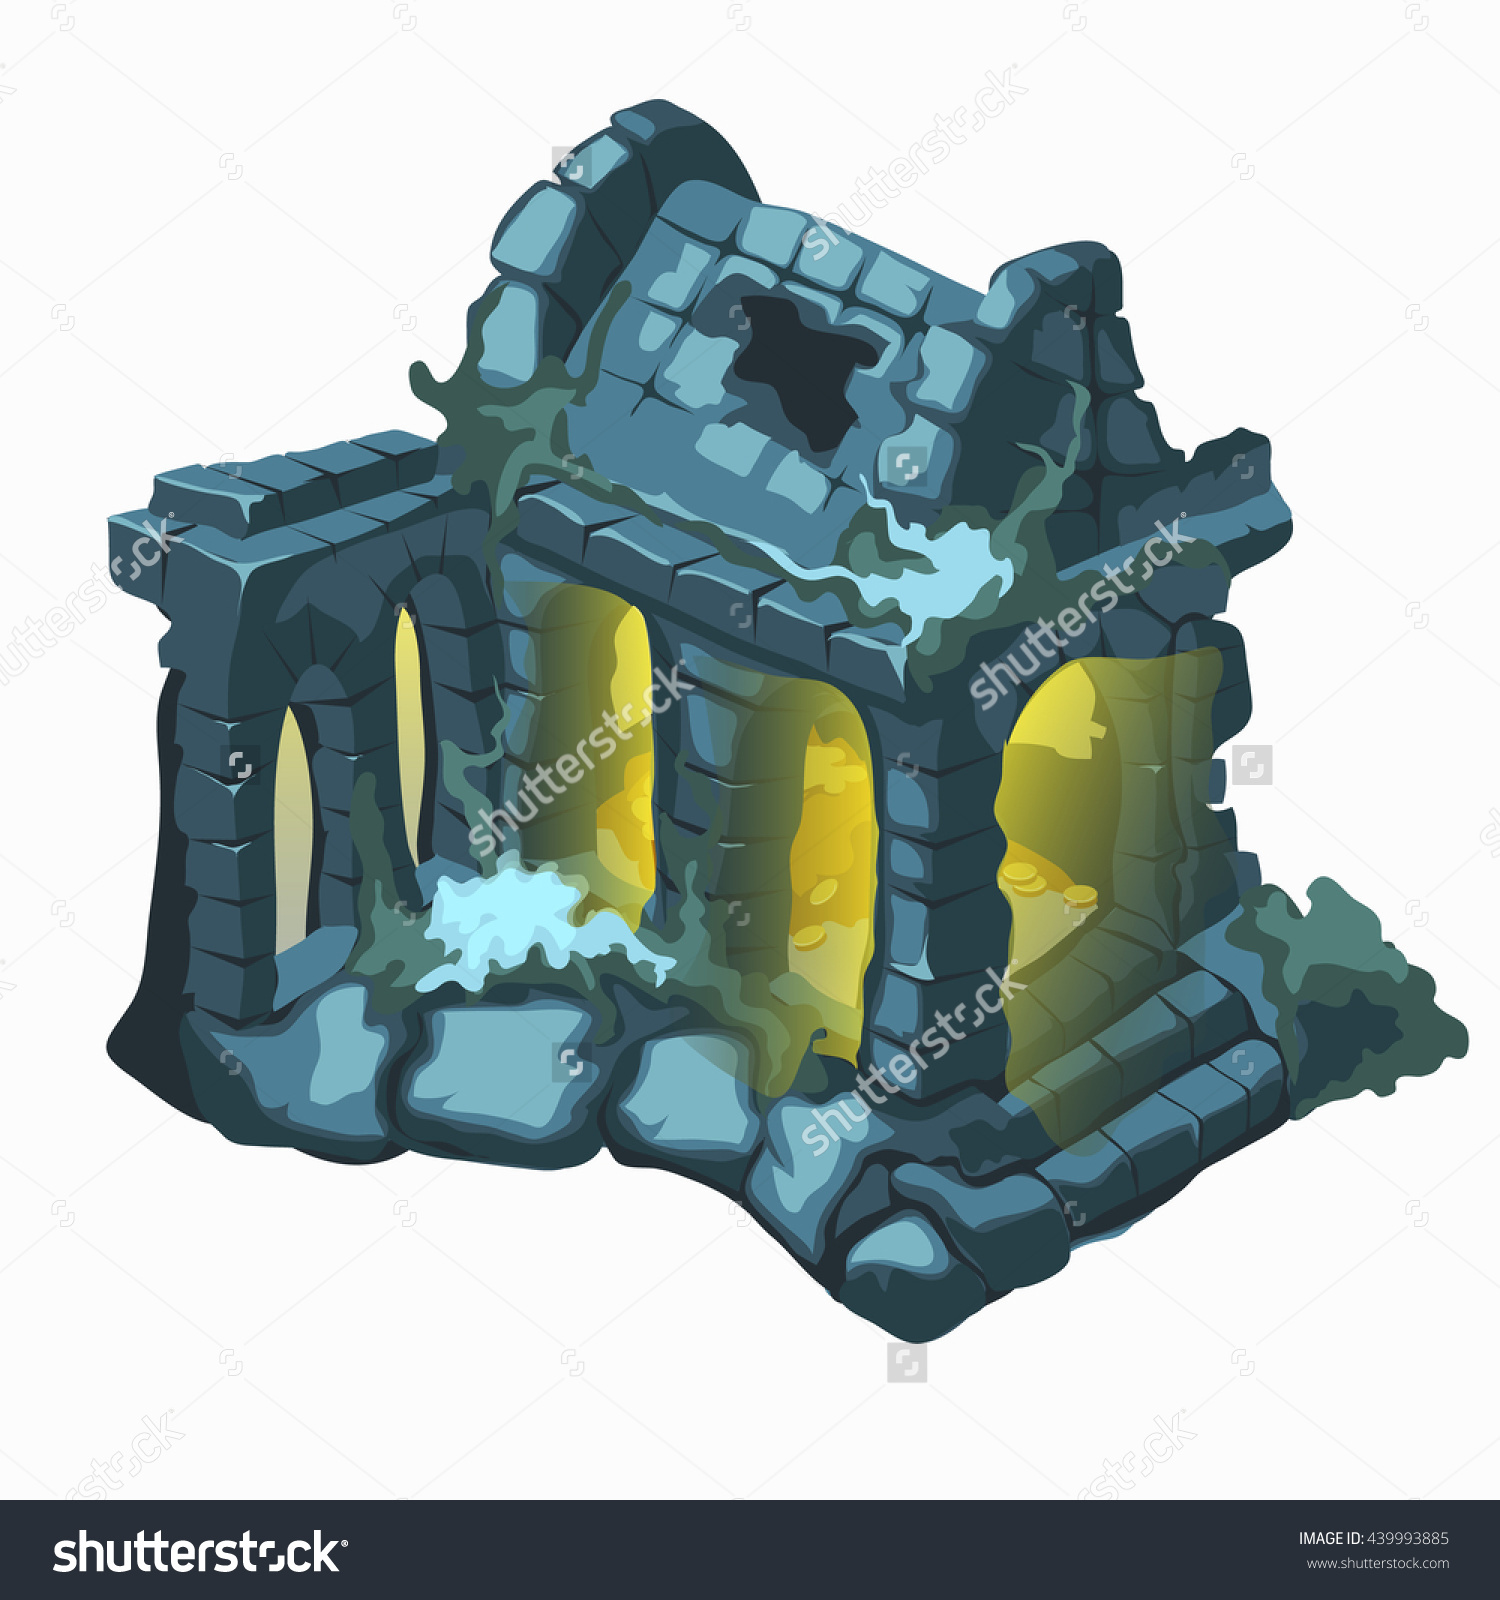 The Abandoned Ruins Of An Old Stone House. Vector Illustration.